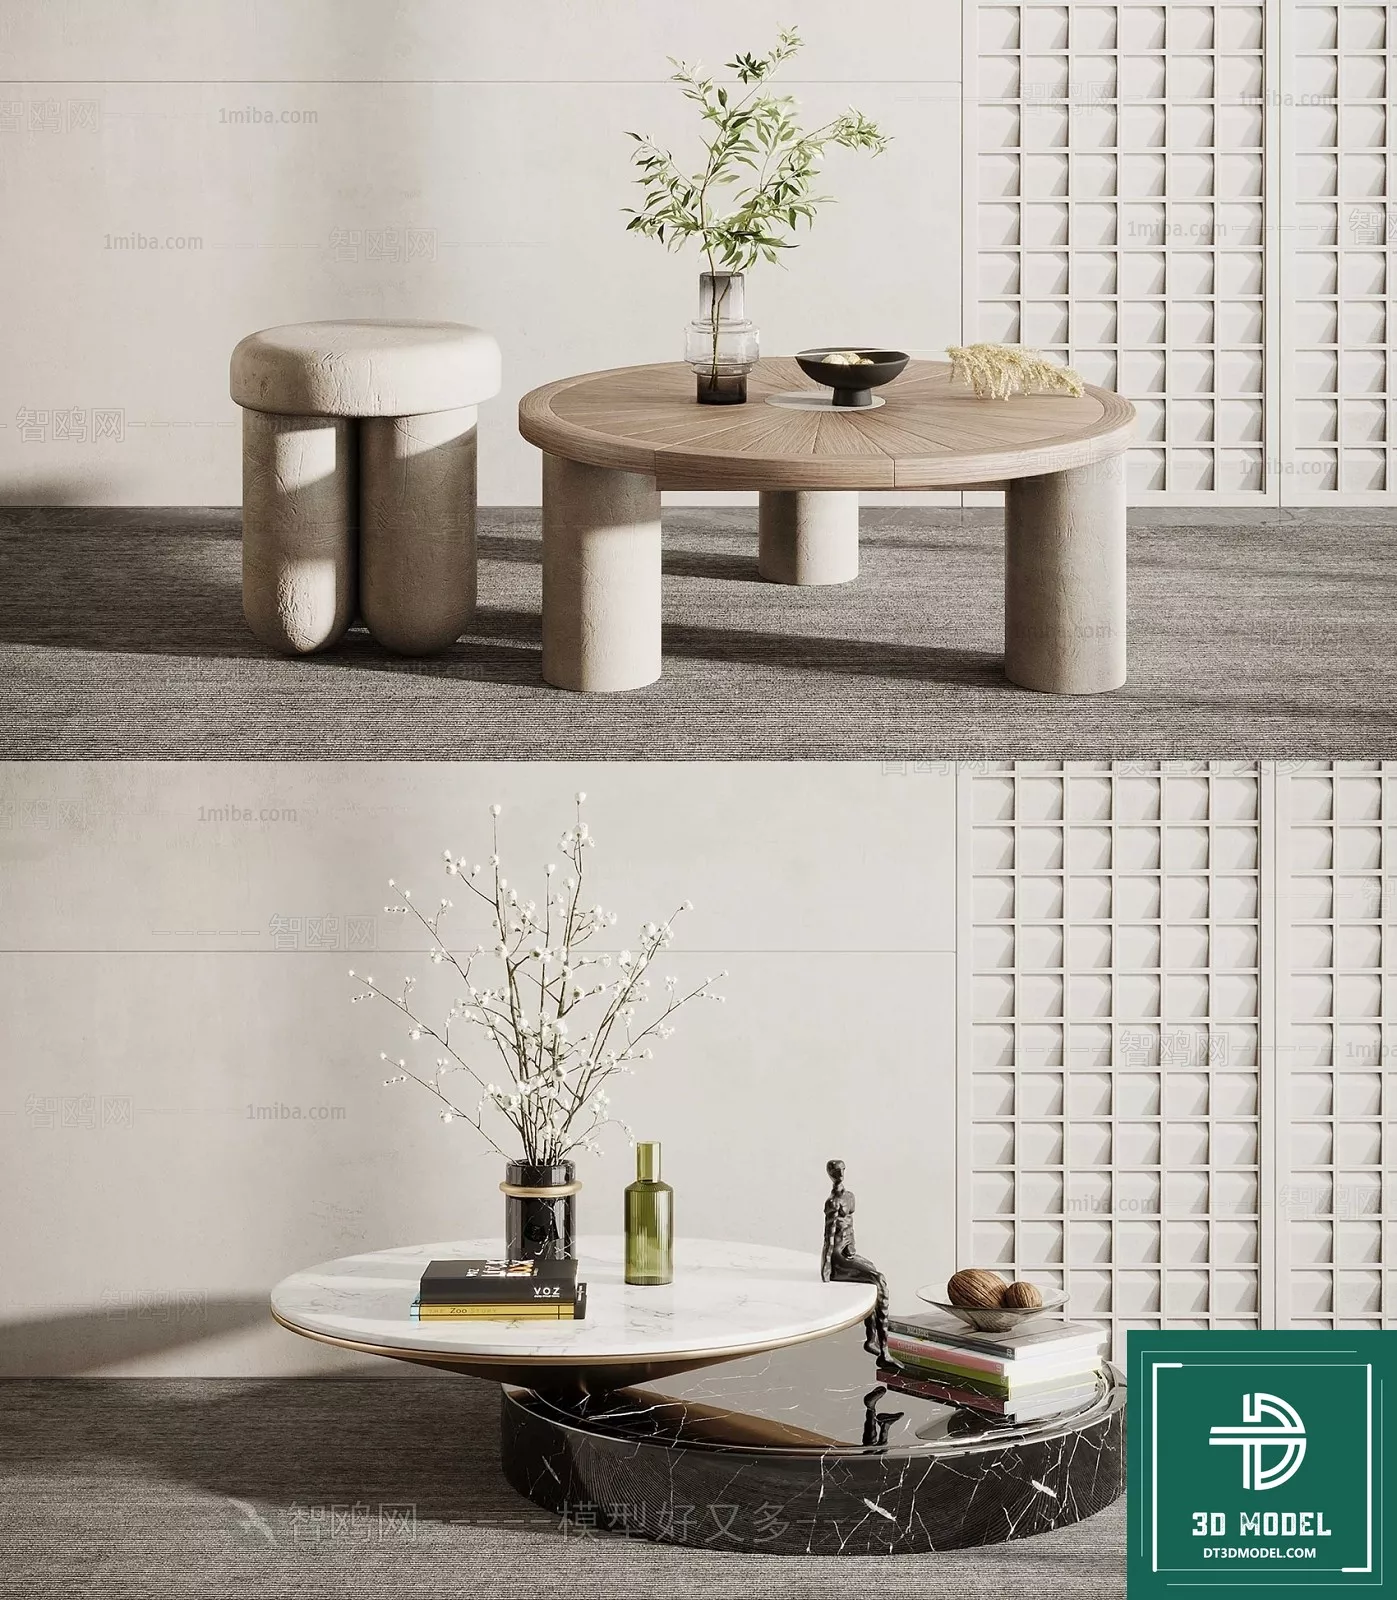 MODERN TEA TABLE - SKETCHUP 3D MODEL - VRAY OR ENSCAPE - ID14926